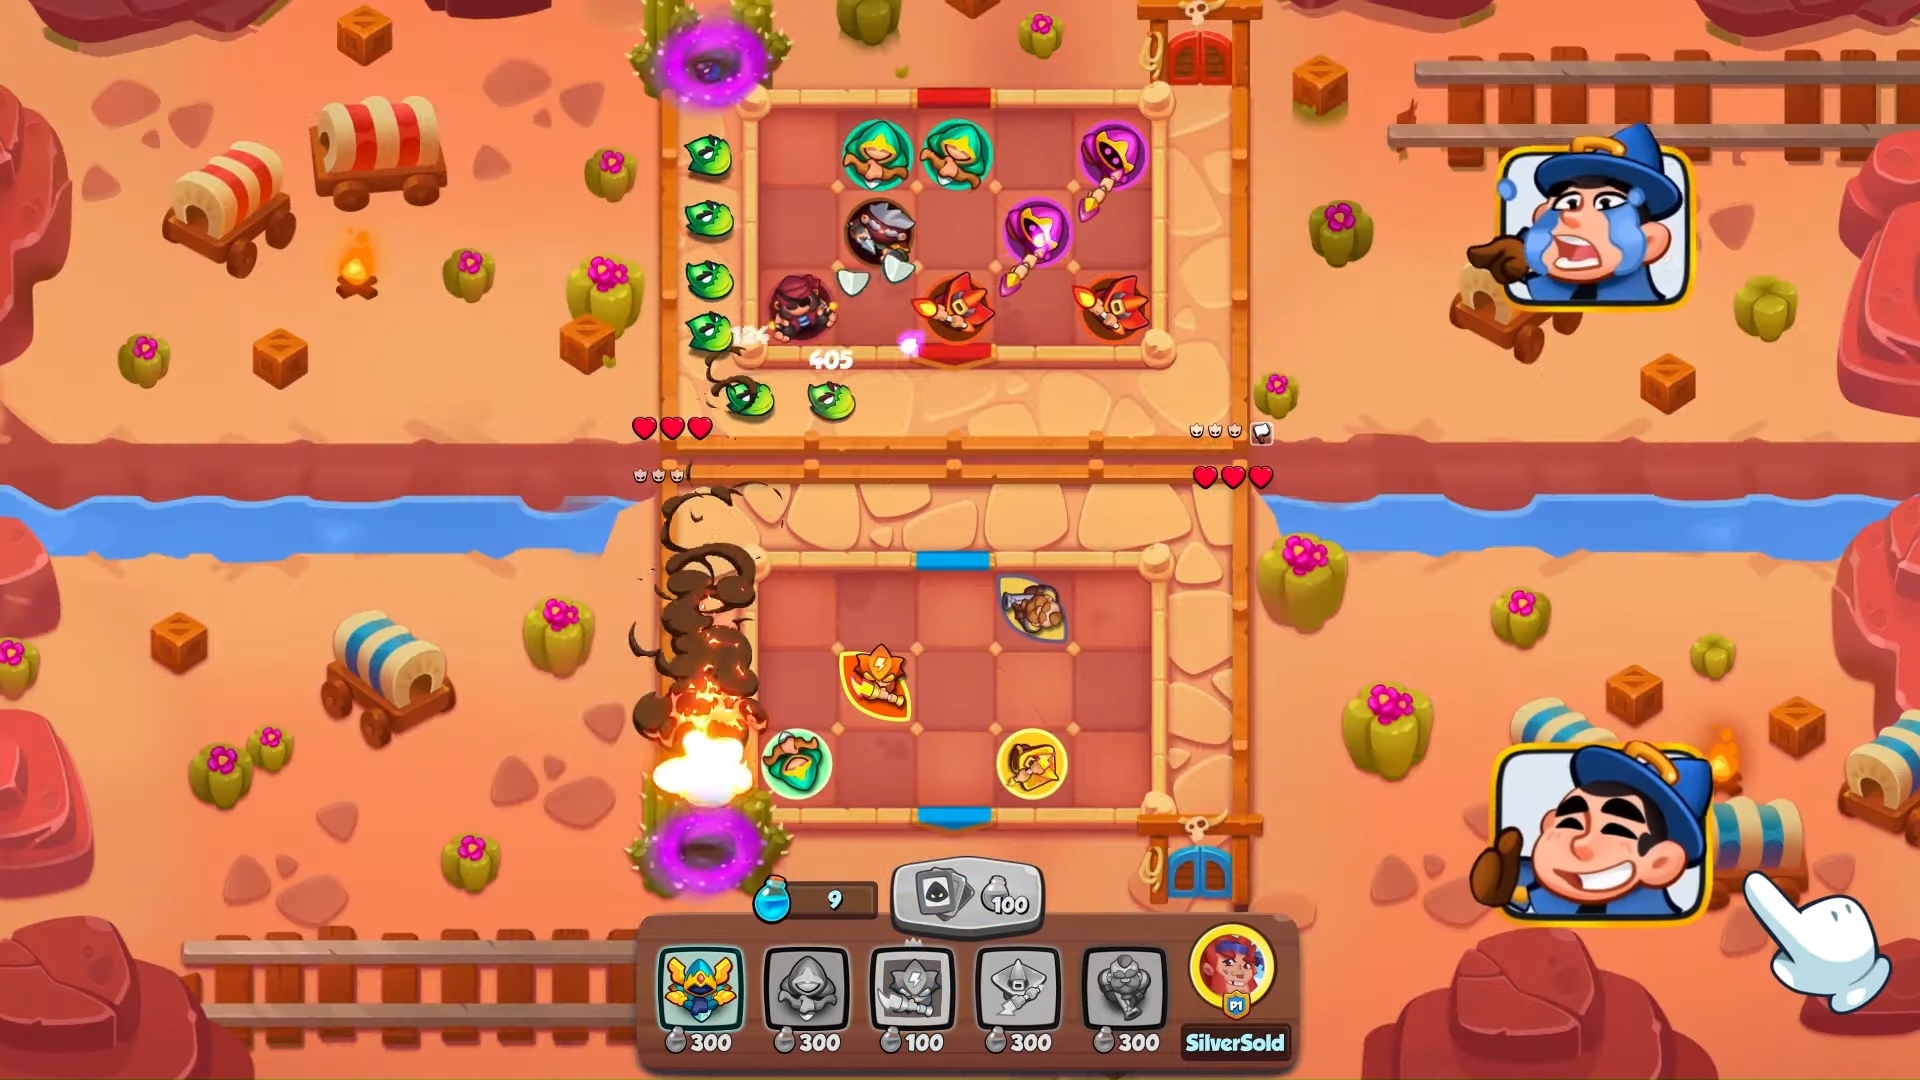 In-game tower defense gameplay the iPad game, Rush Royale,